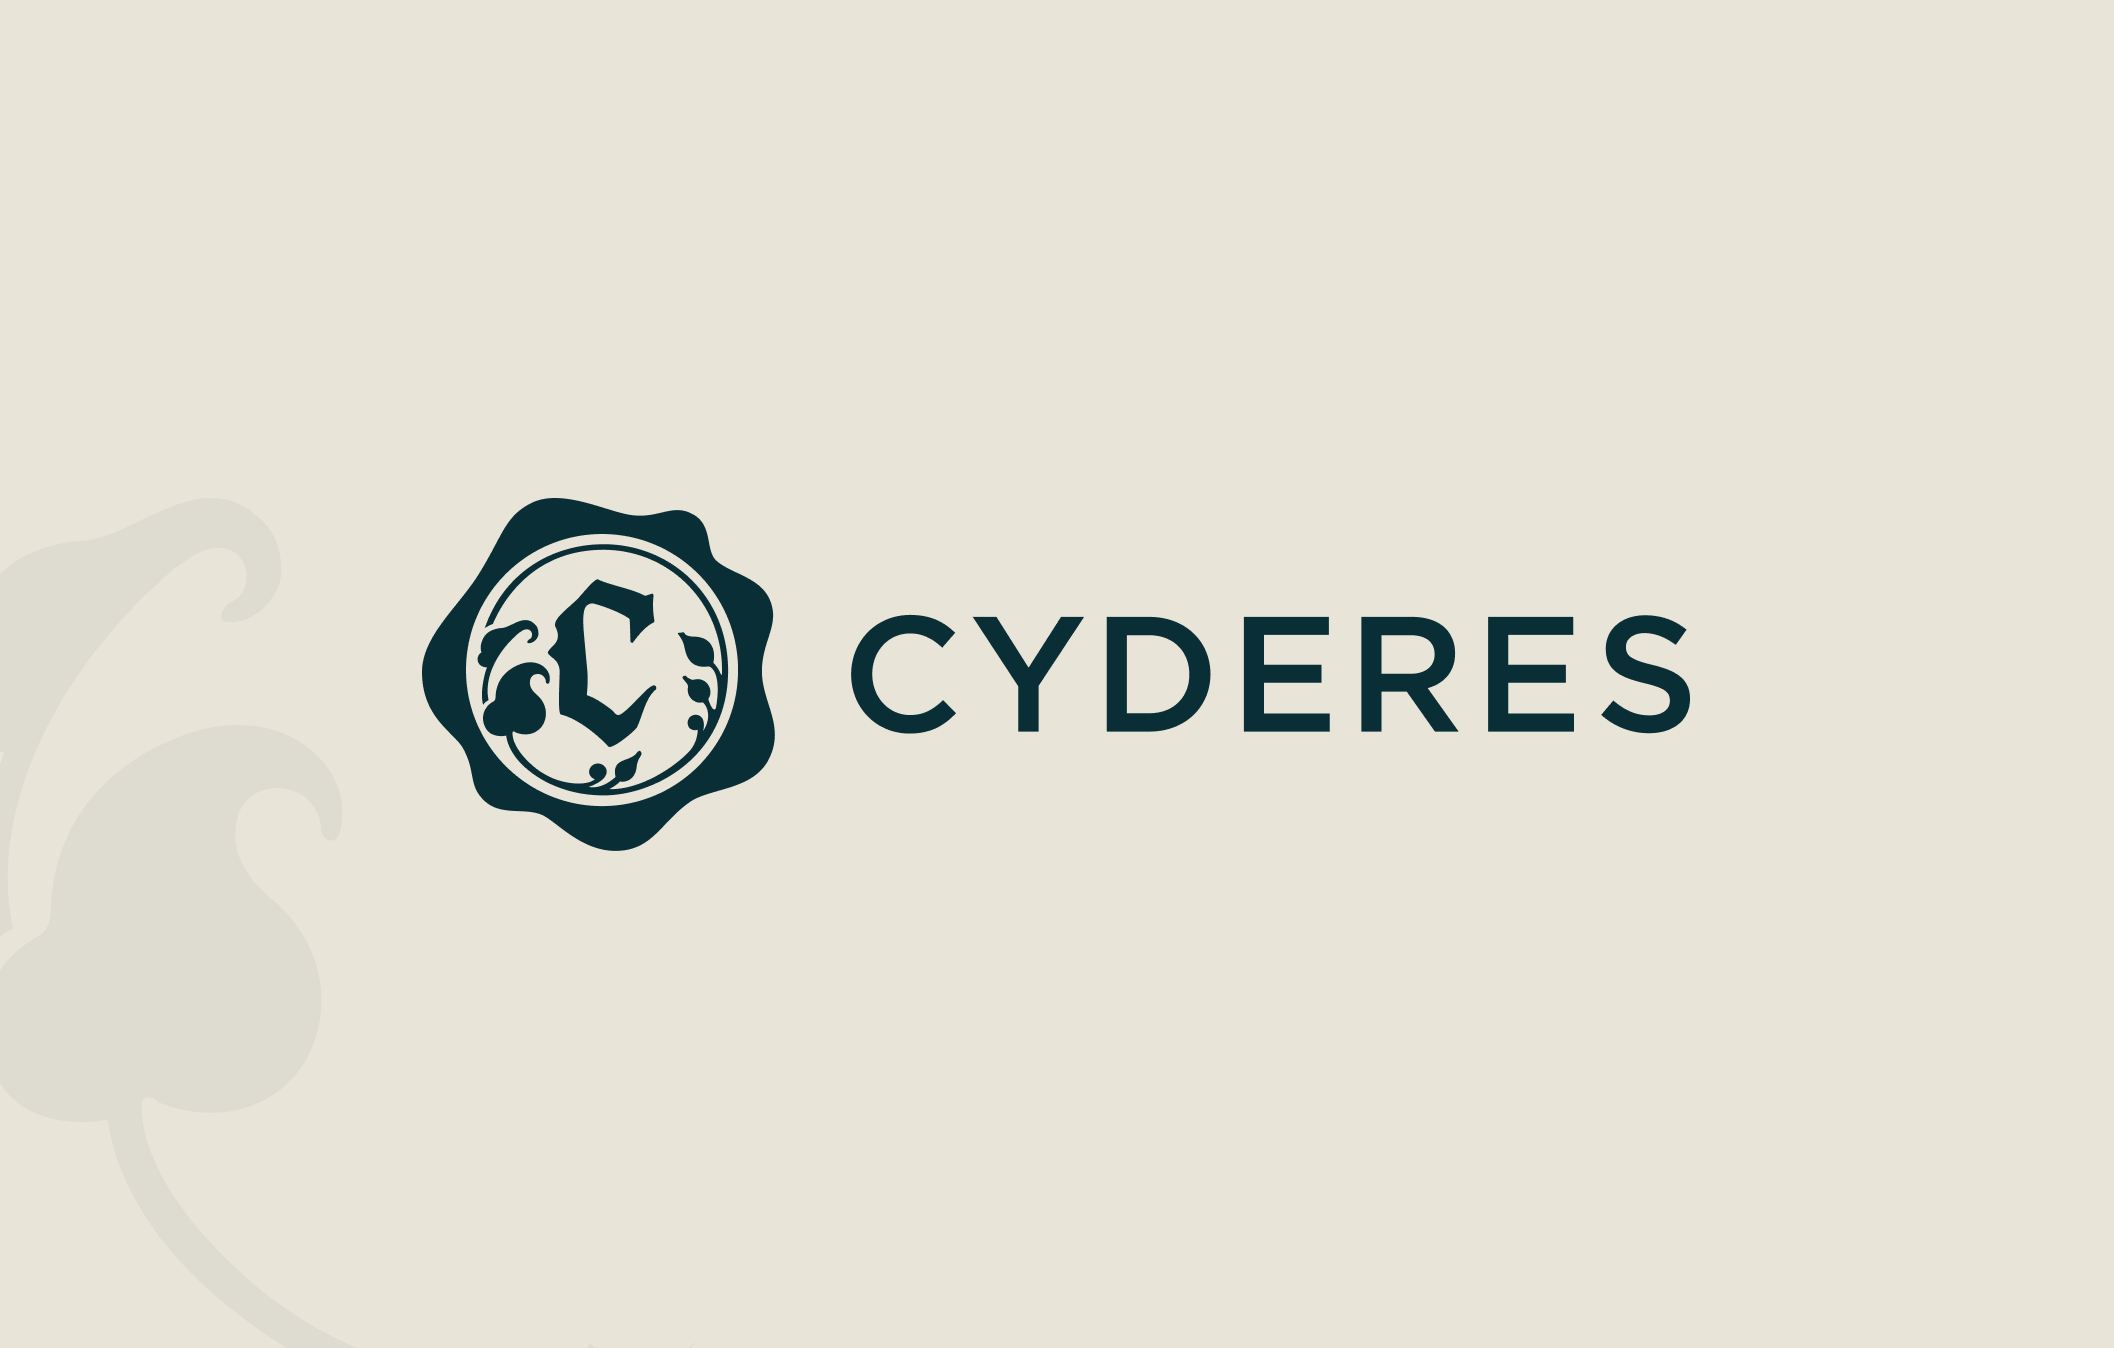 Cyderes is Awarded “Partner of the Year” by Google Cloud Security